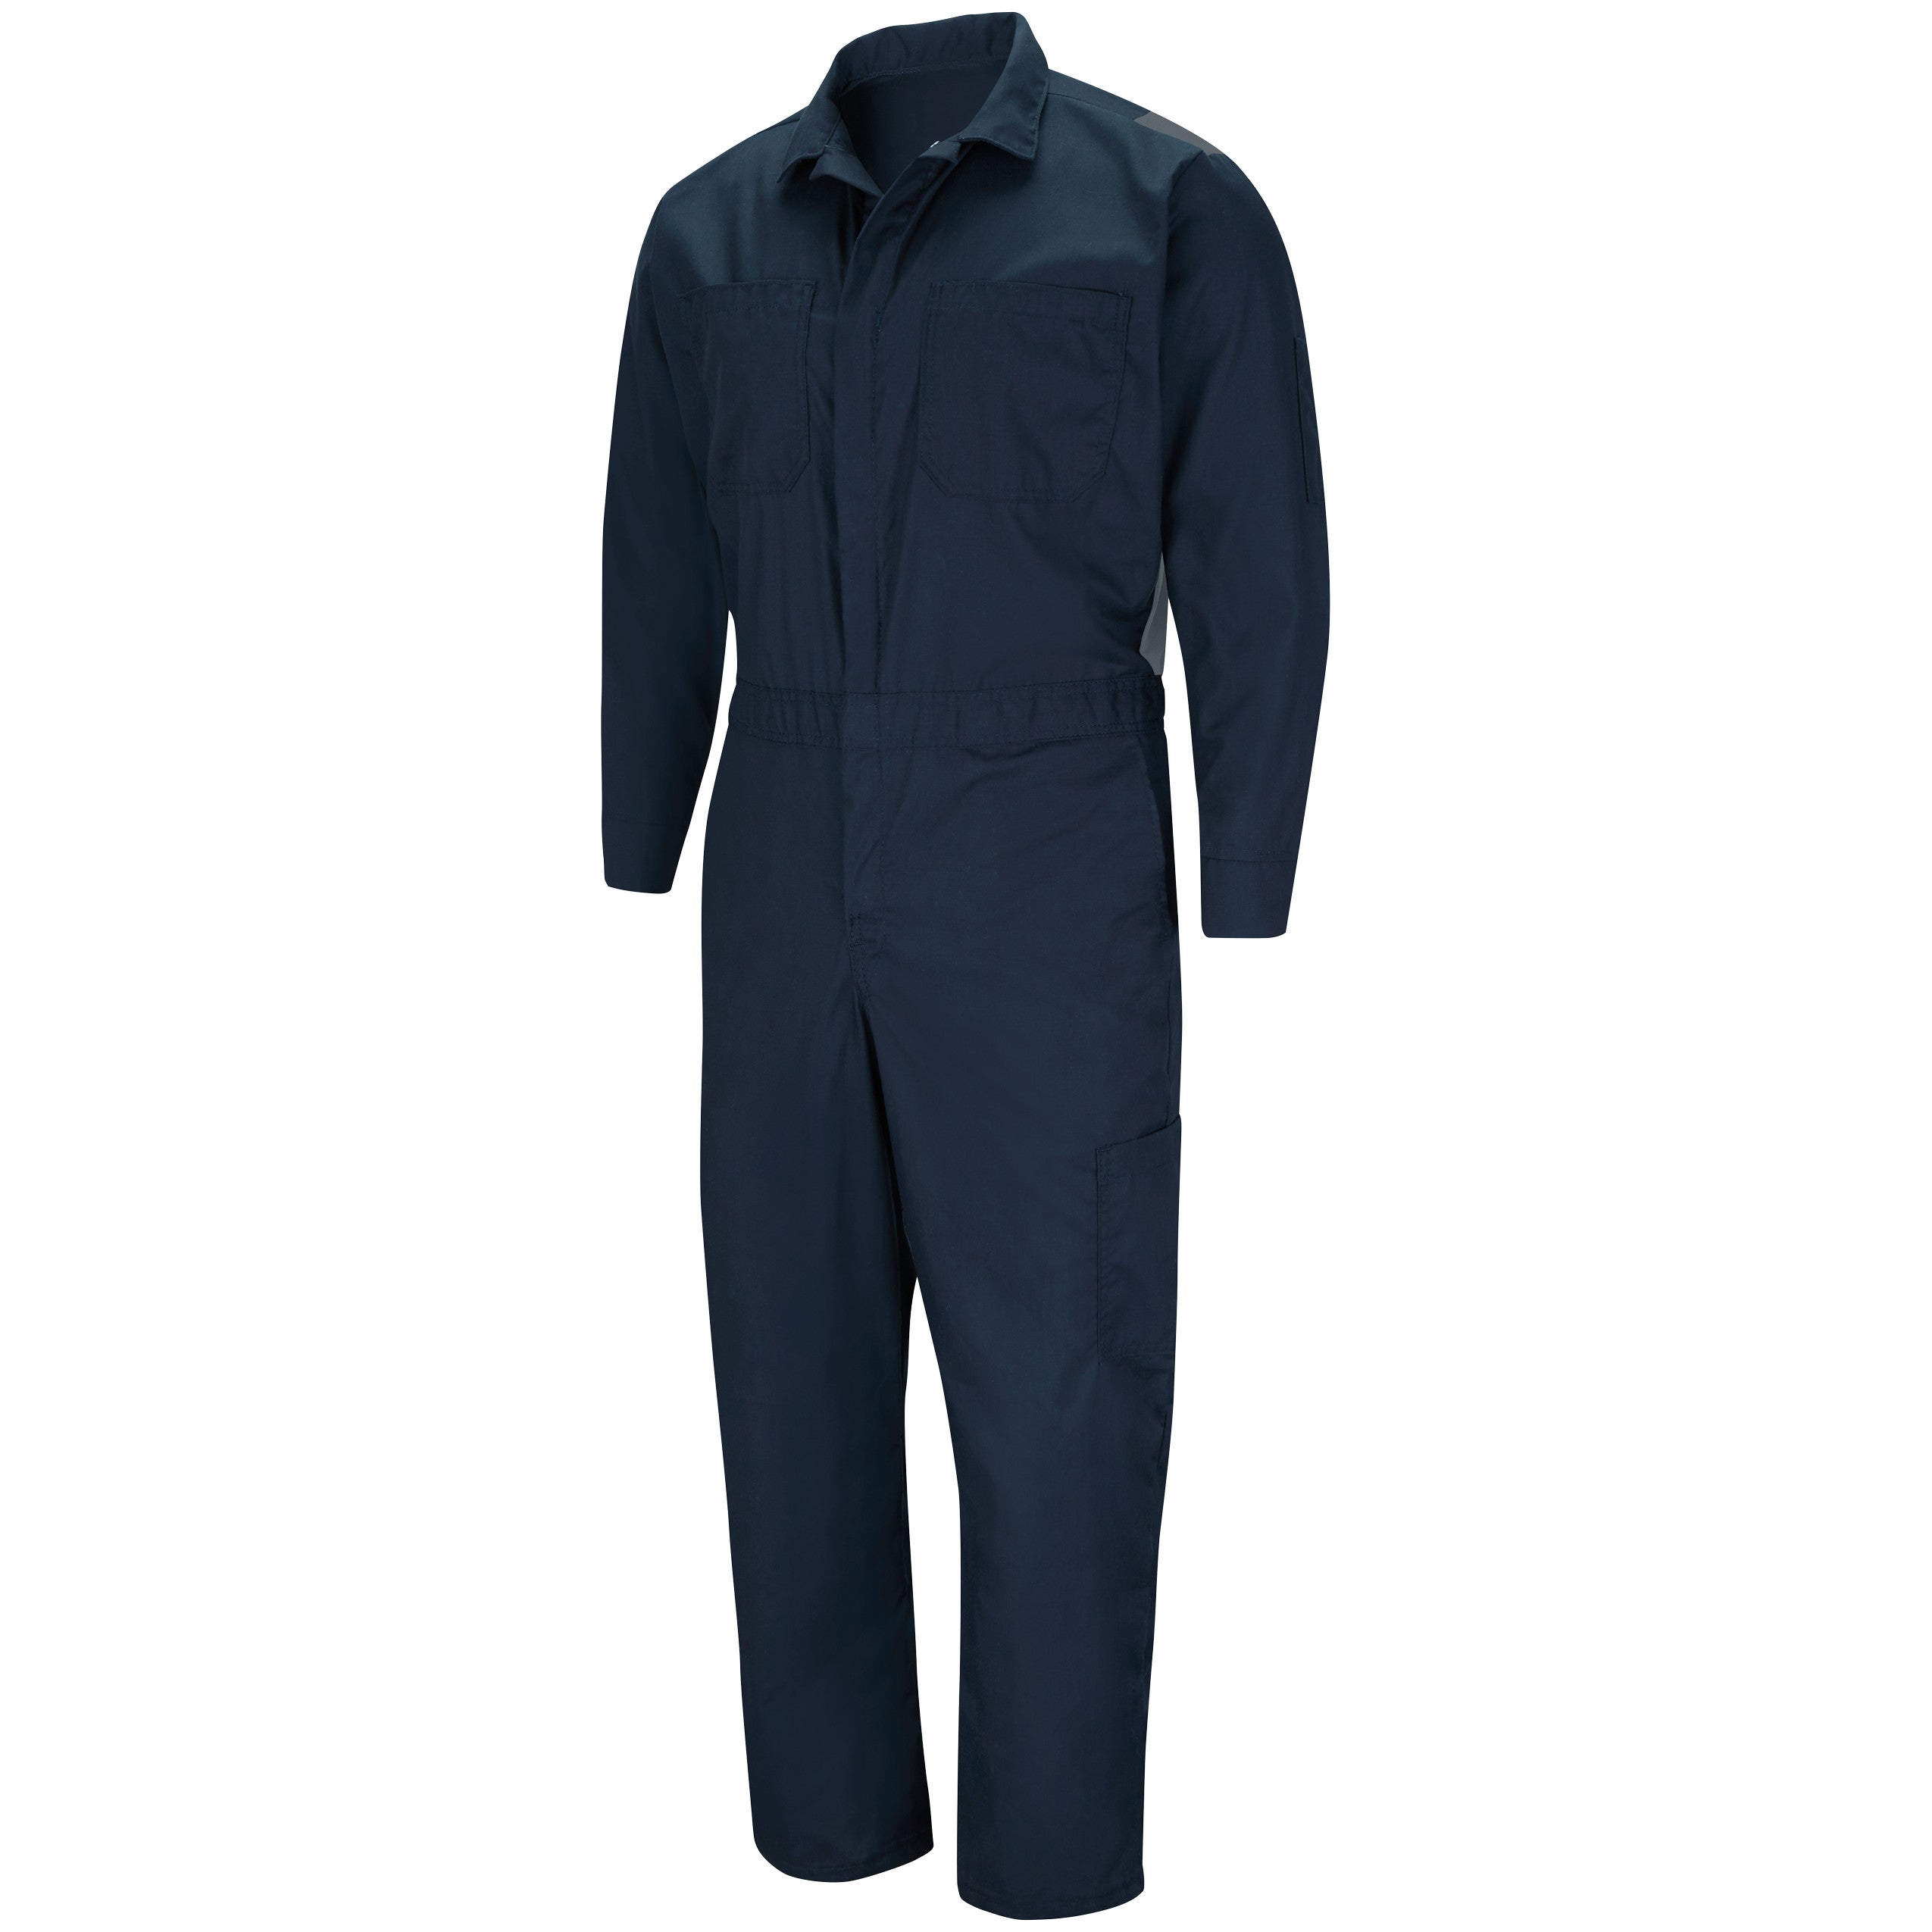 Performance Plus Lightweight Coverall with OilBlok Technology CY34 - Navy / Charcoal Mesh-eSafety Supplies, Inc